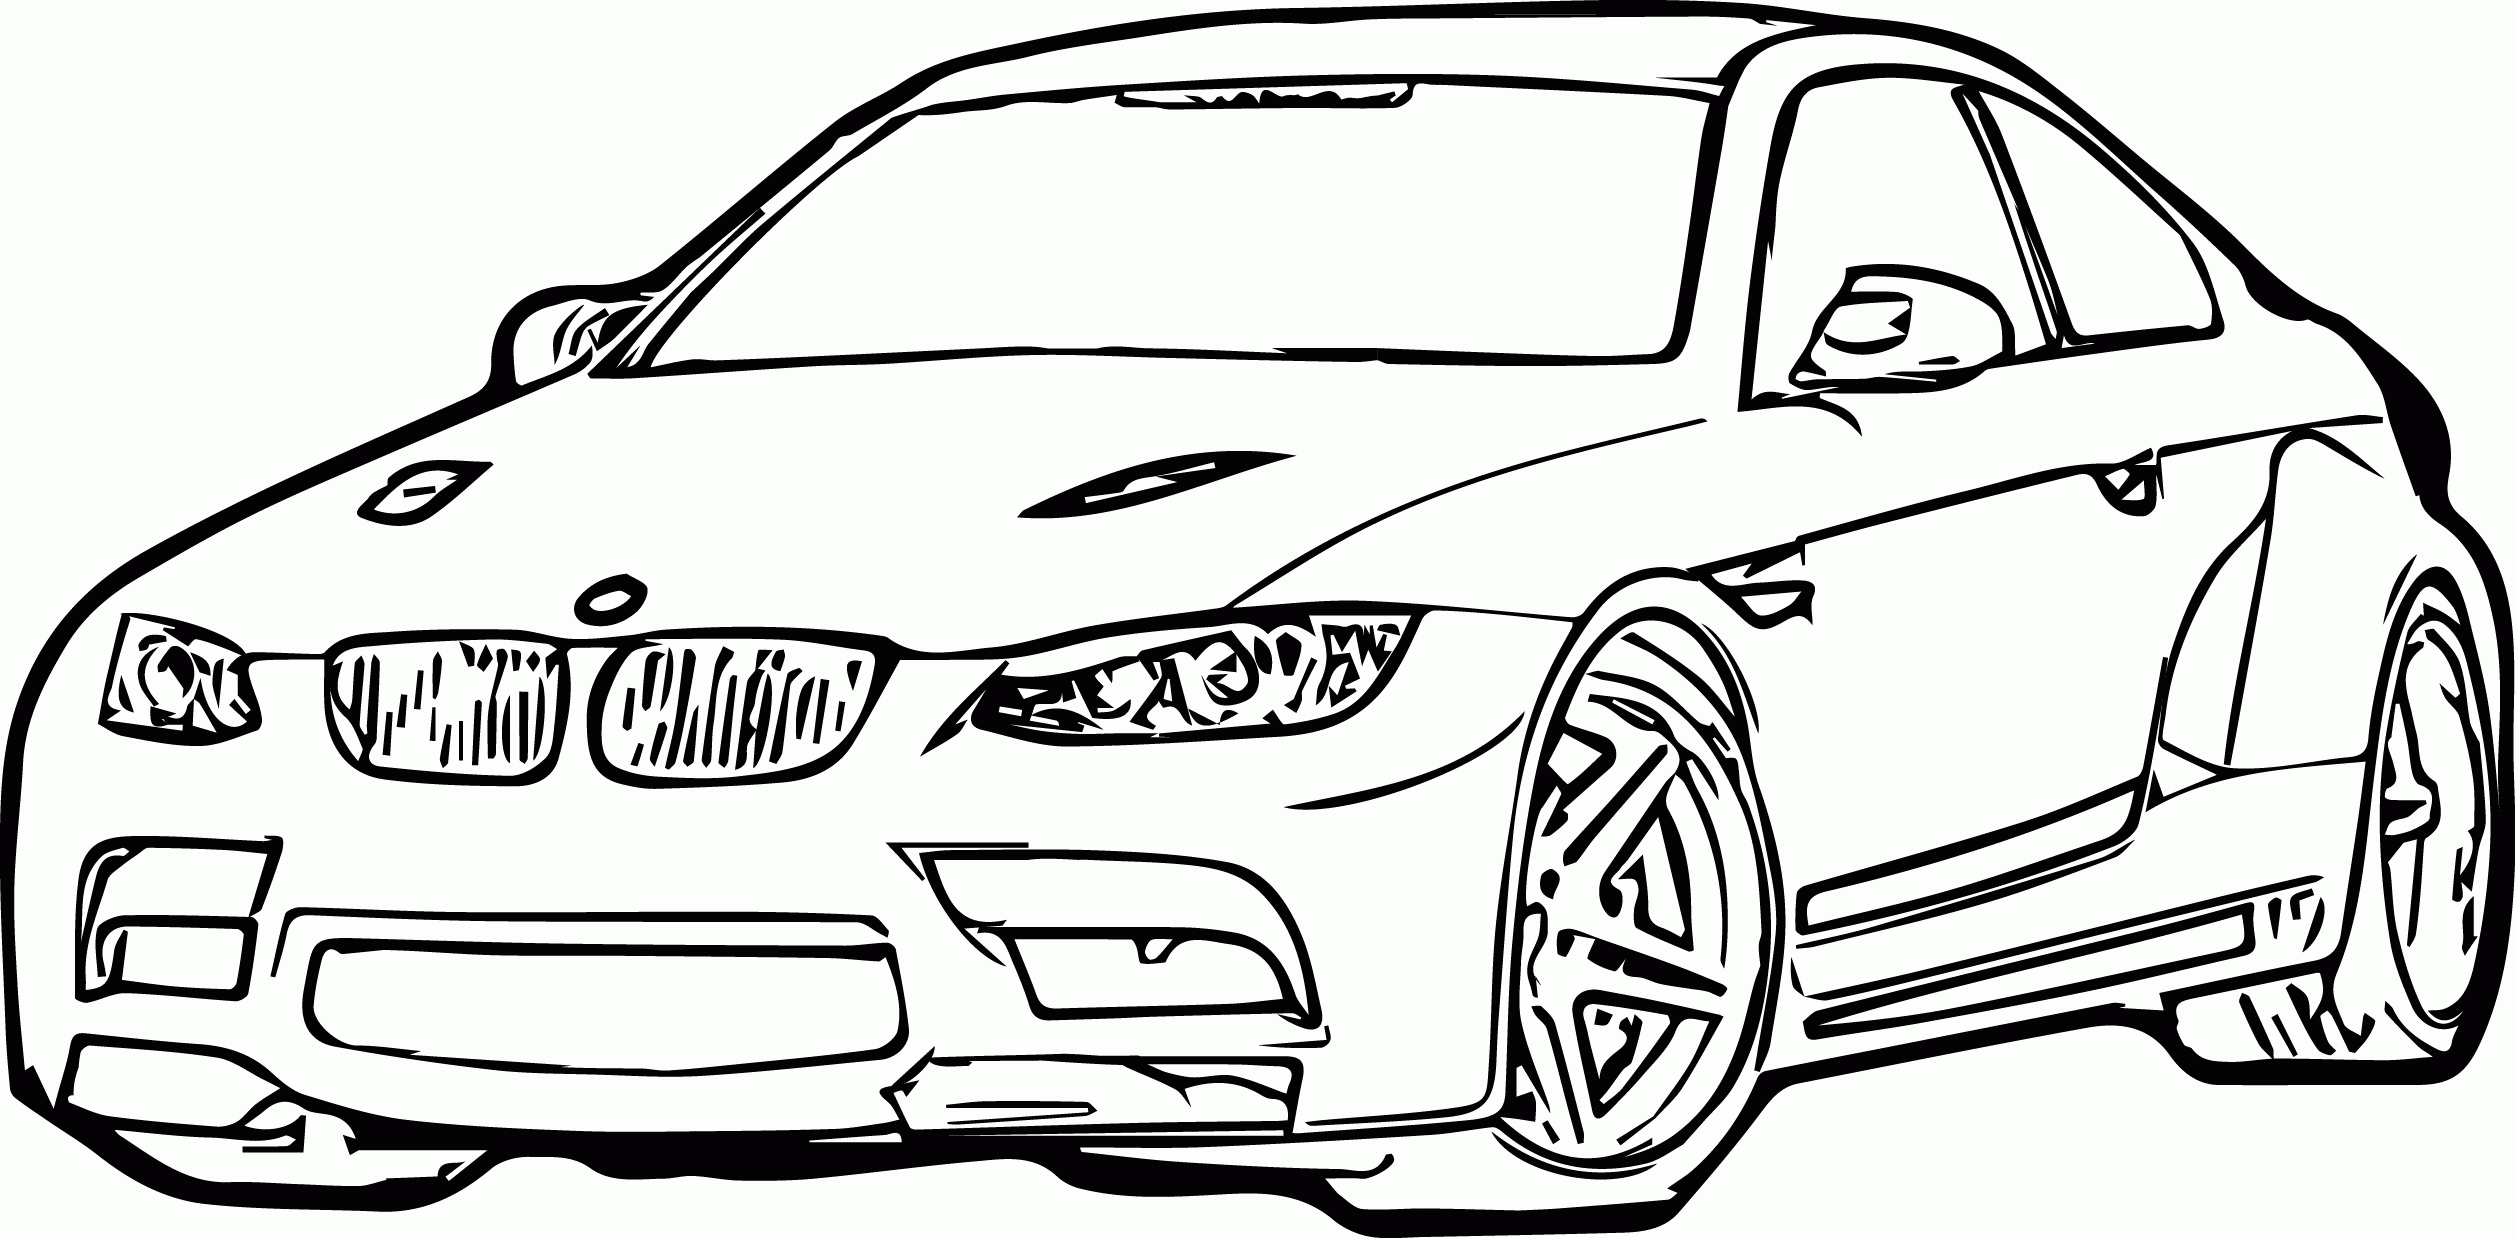 Bmw Coloring Page 02 | Wecoloringpage